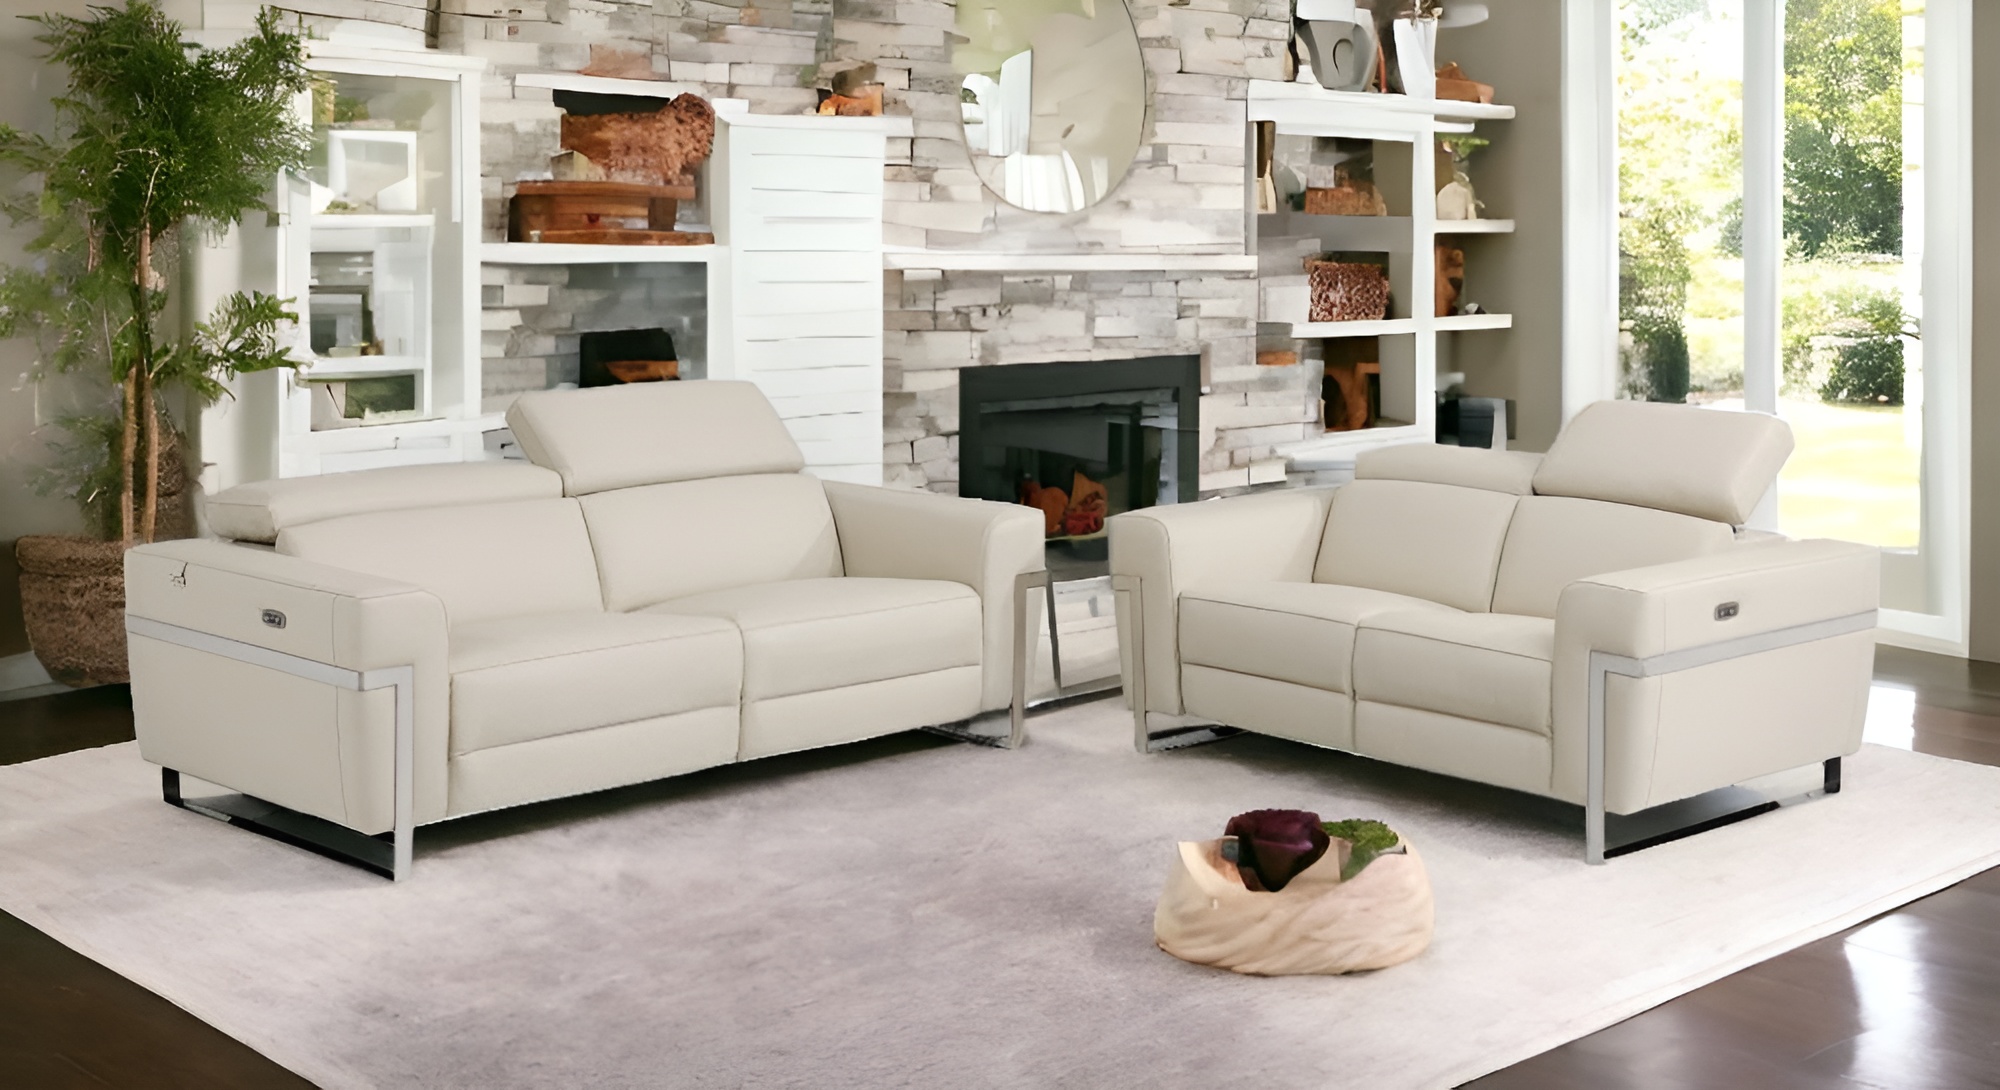 Two Piece Indoor Beige Italian Leather Five Person Seating Set-480881-1